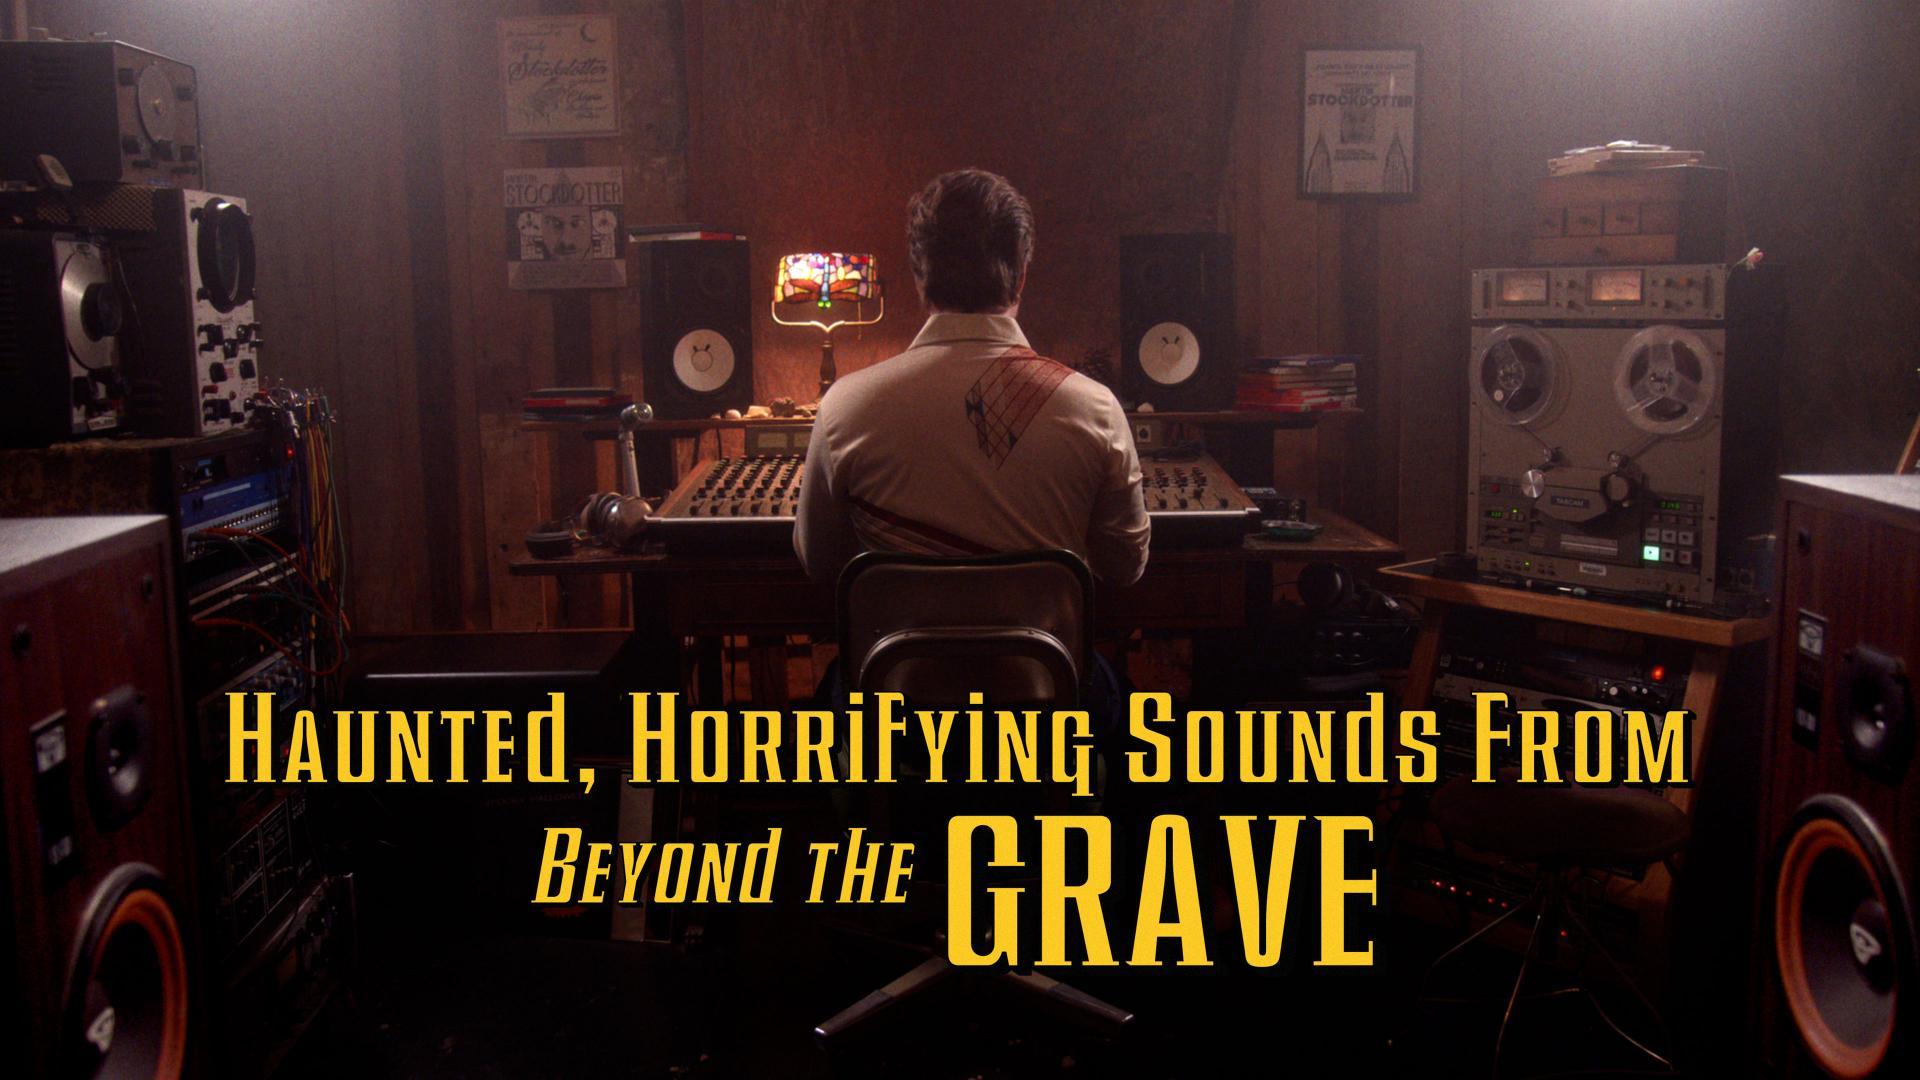 Haunted, Horrifying Sounds from Beyond the Grave (C) - Posters